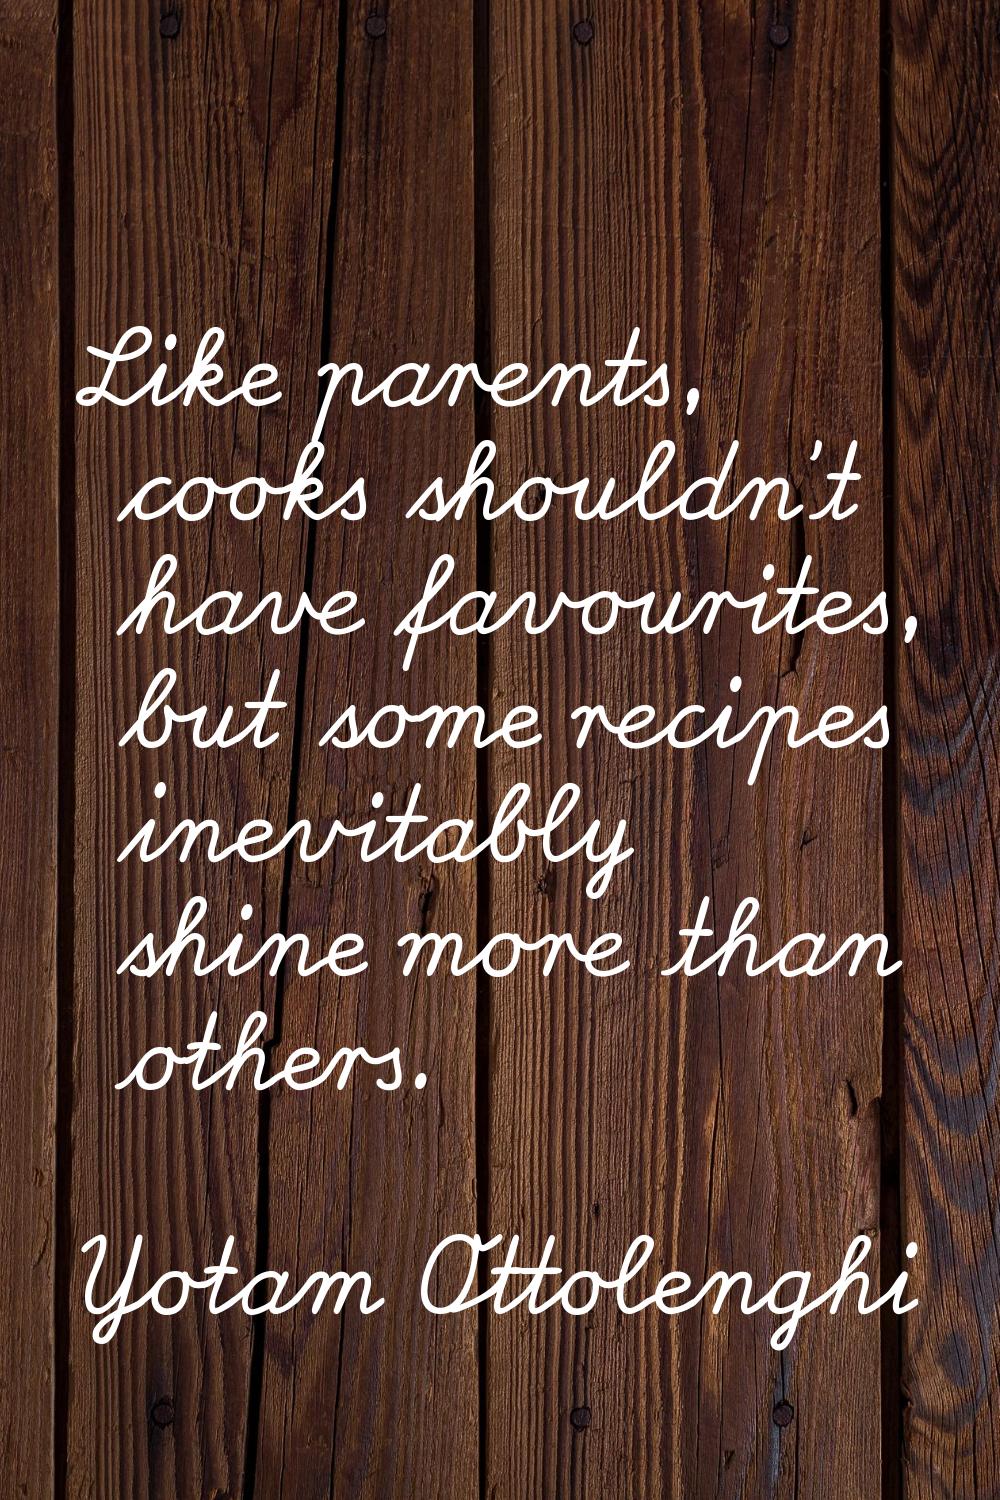 Like parents, cooks shouldn't have favourites, but some recipes inevitably shine more than others.